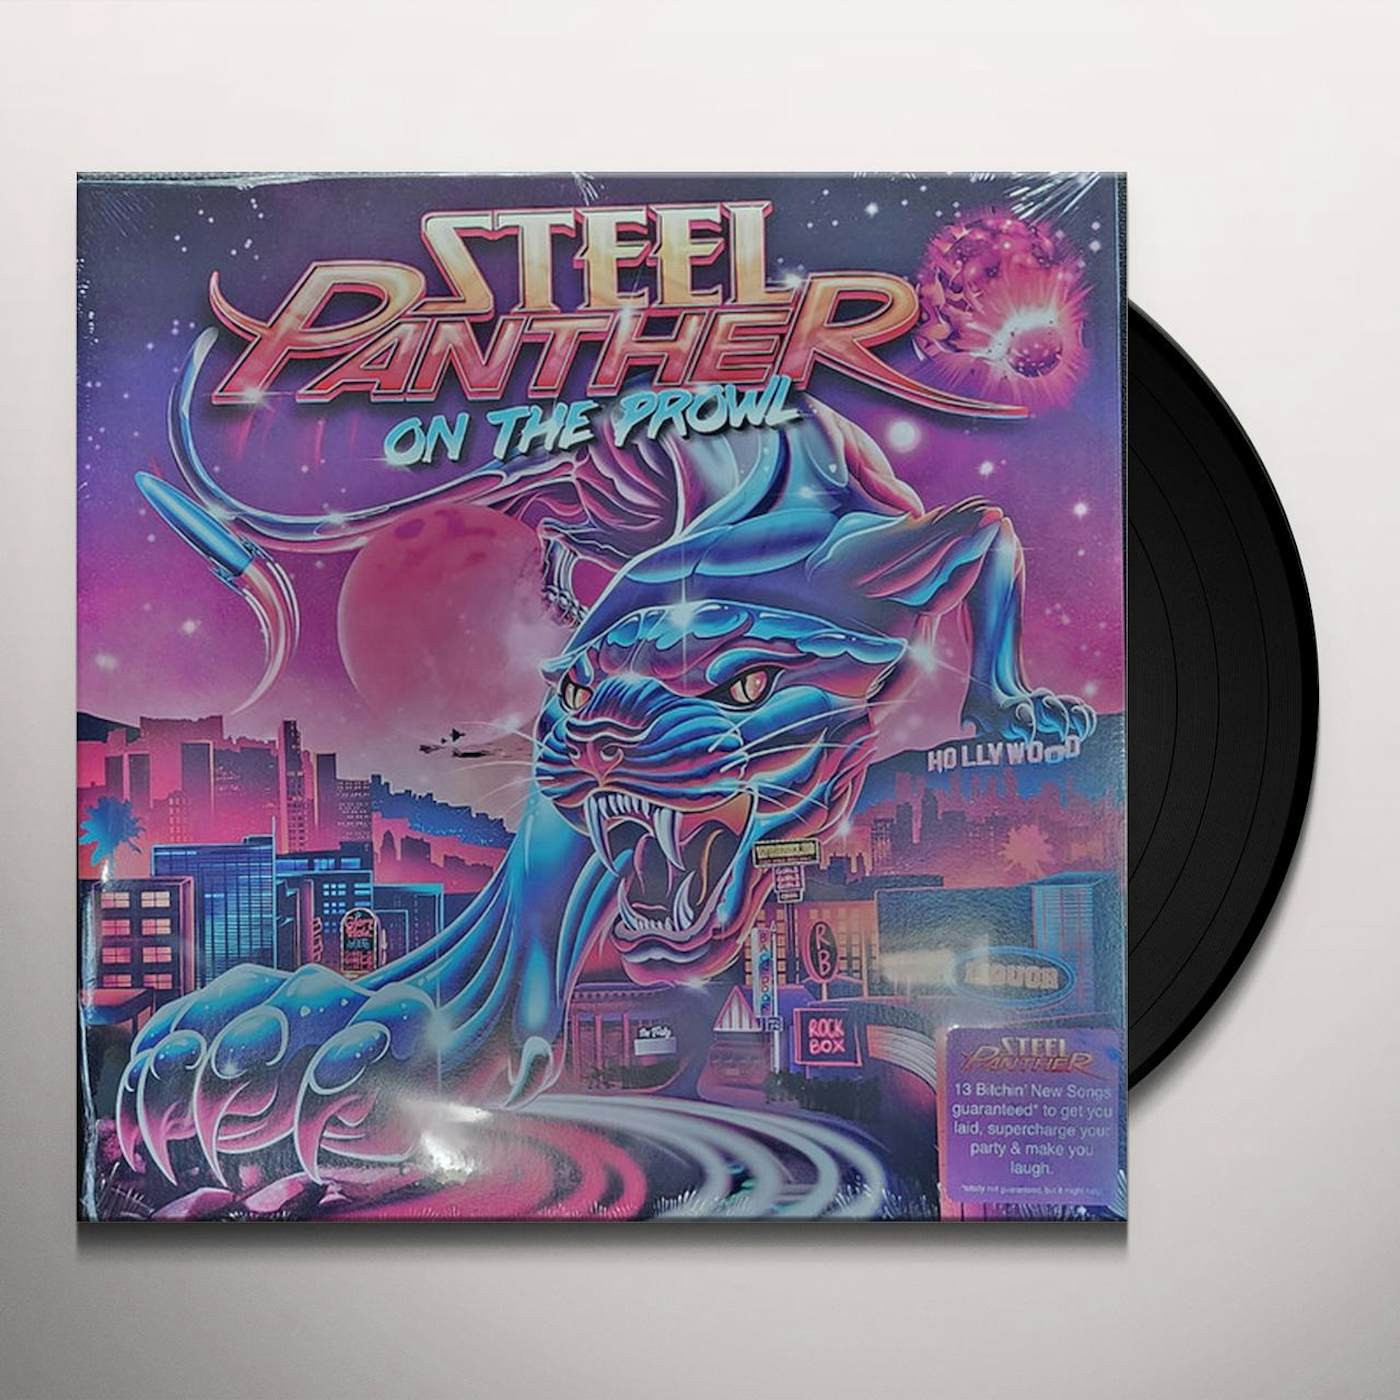 Steel Panther On the Prowl Vinyl Record